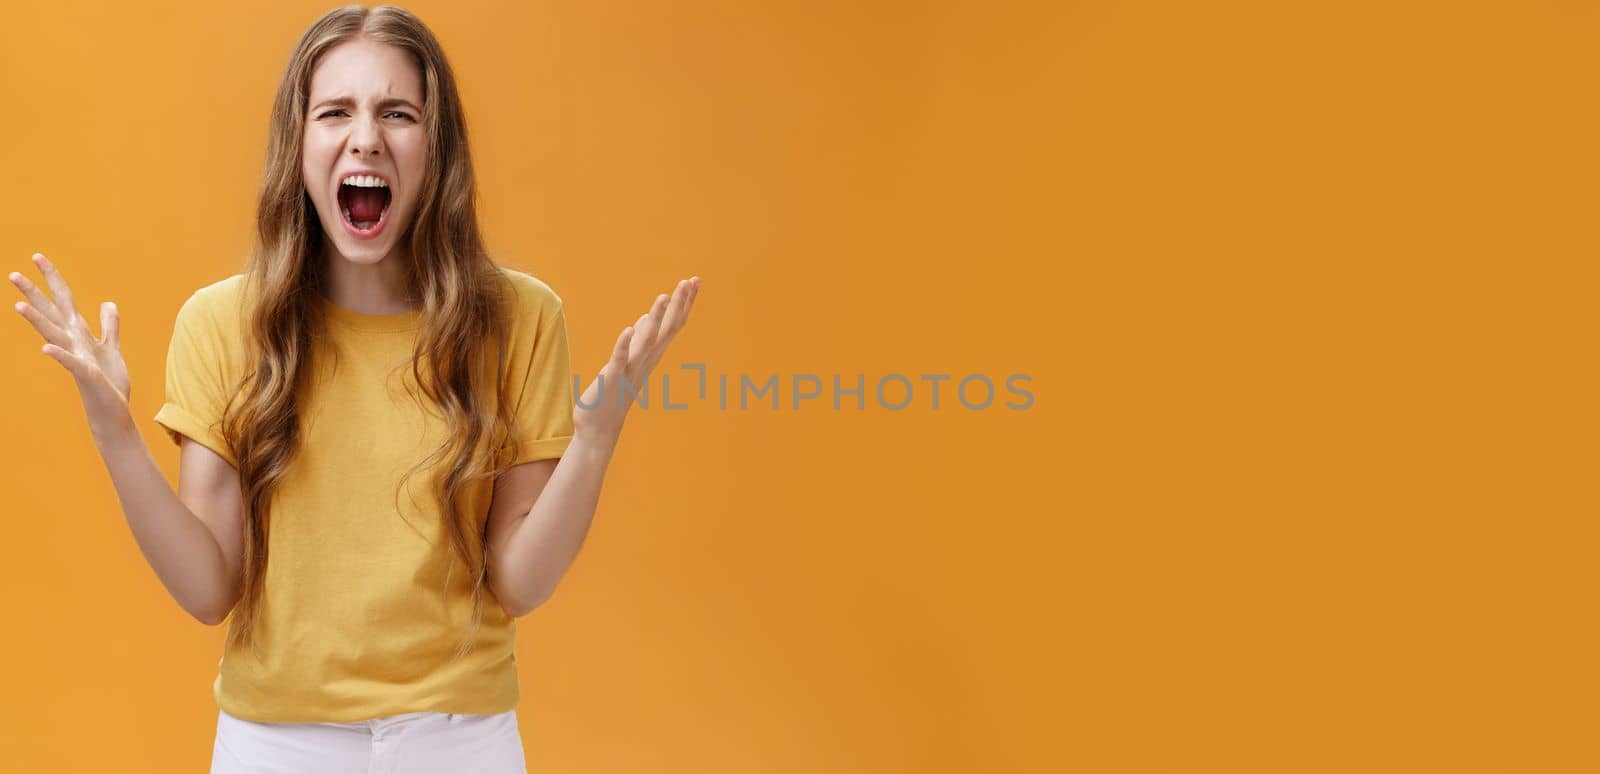 Studio shot of young woman during argument losing temper standing pressured and pissed yelling out loud from hate and anger gesturing with raised palms making furious face posing against orange wall. Emotions concept